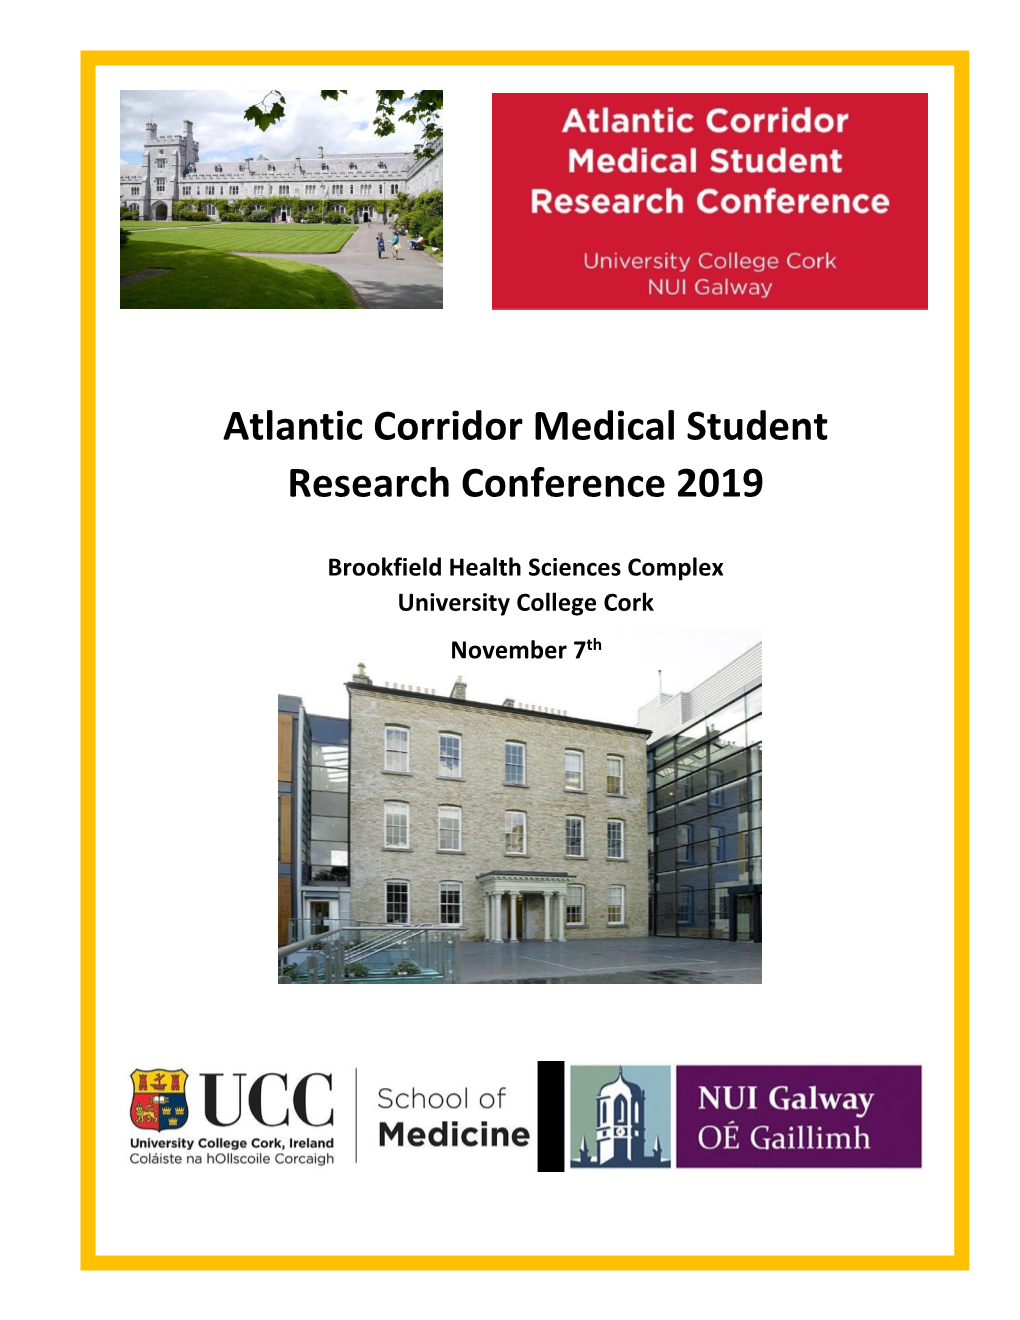 Atlantic Corridor Medical Student Research Conference 2019